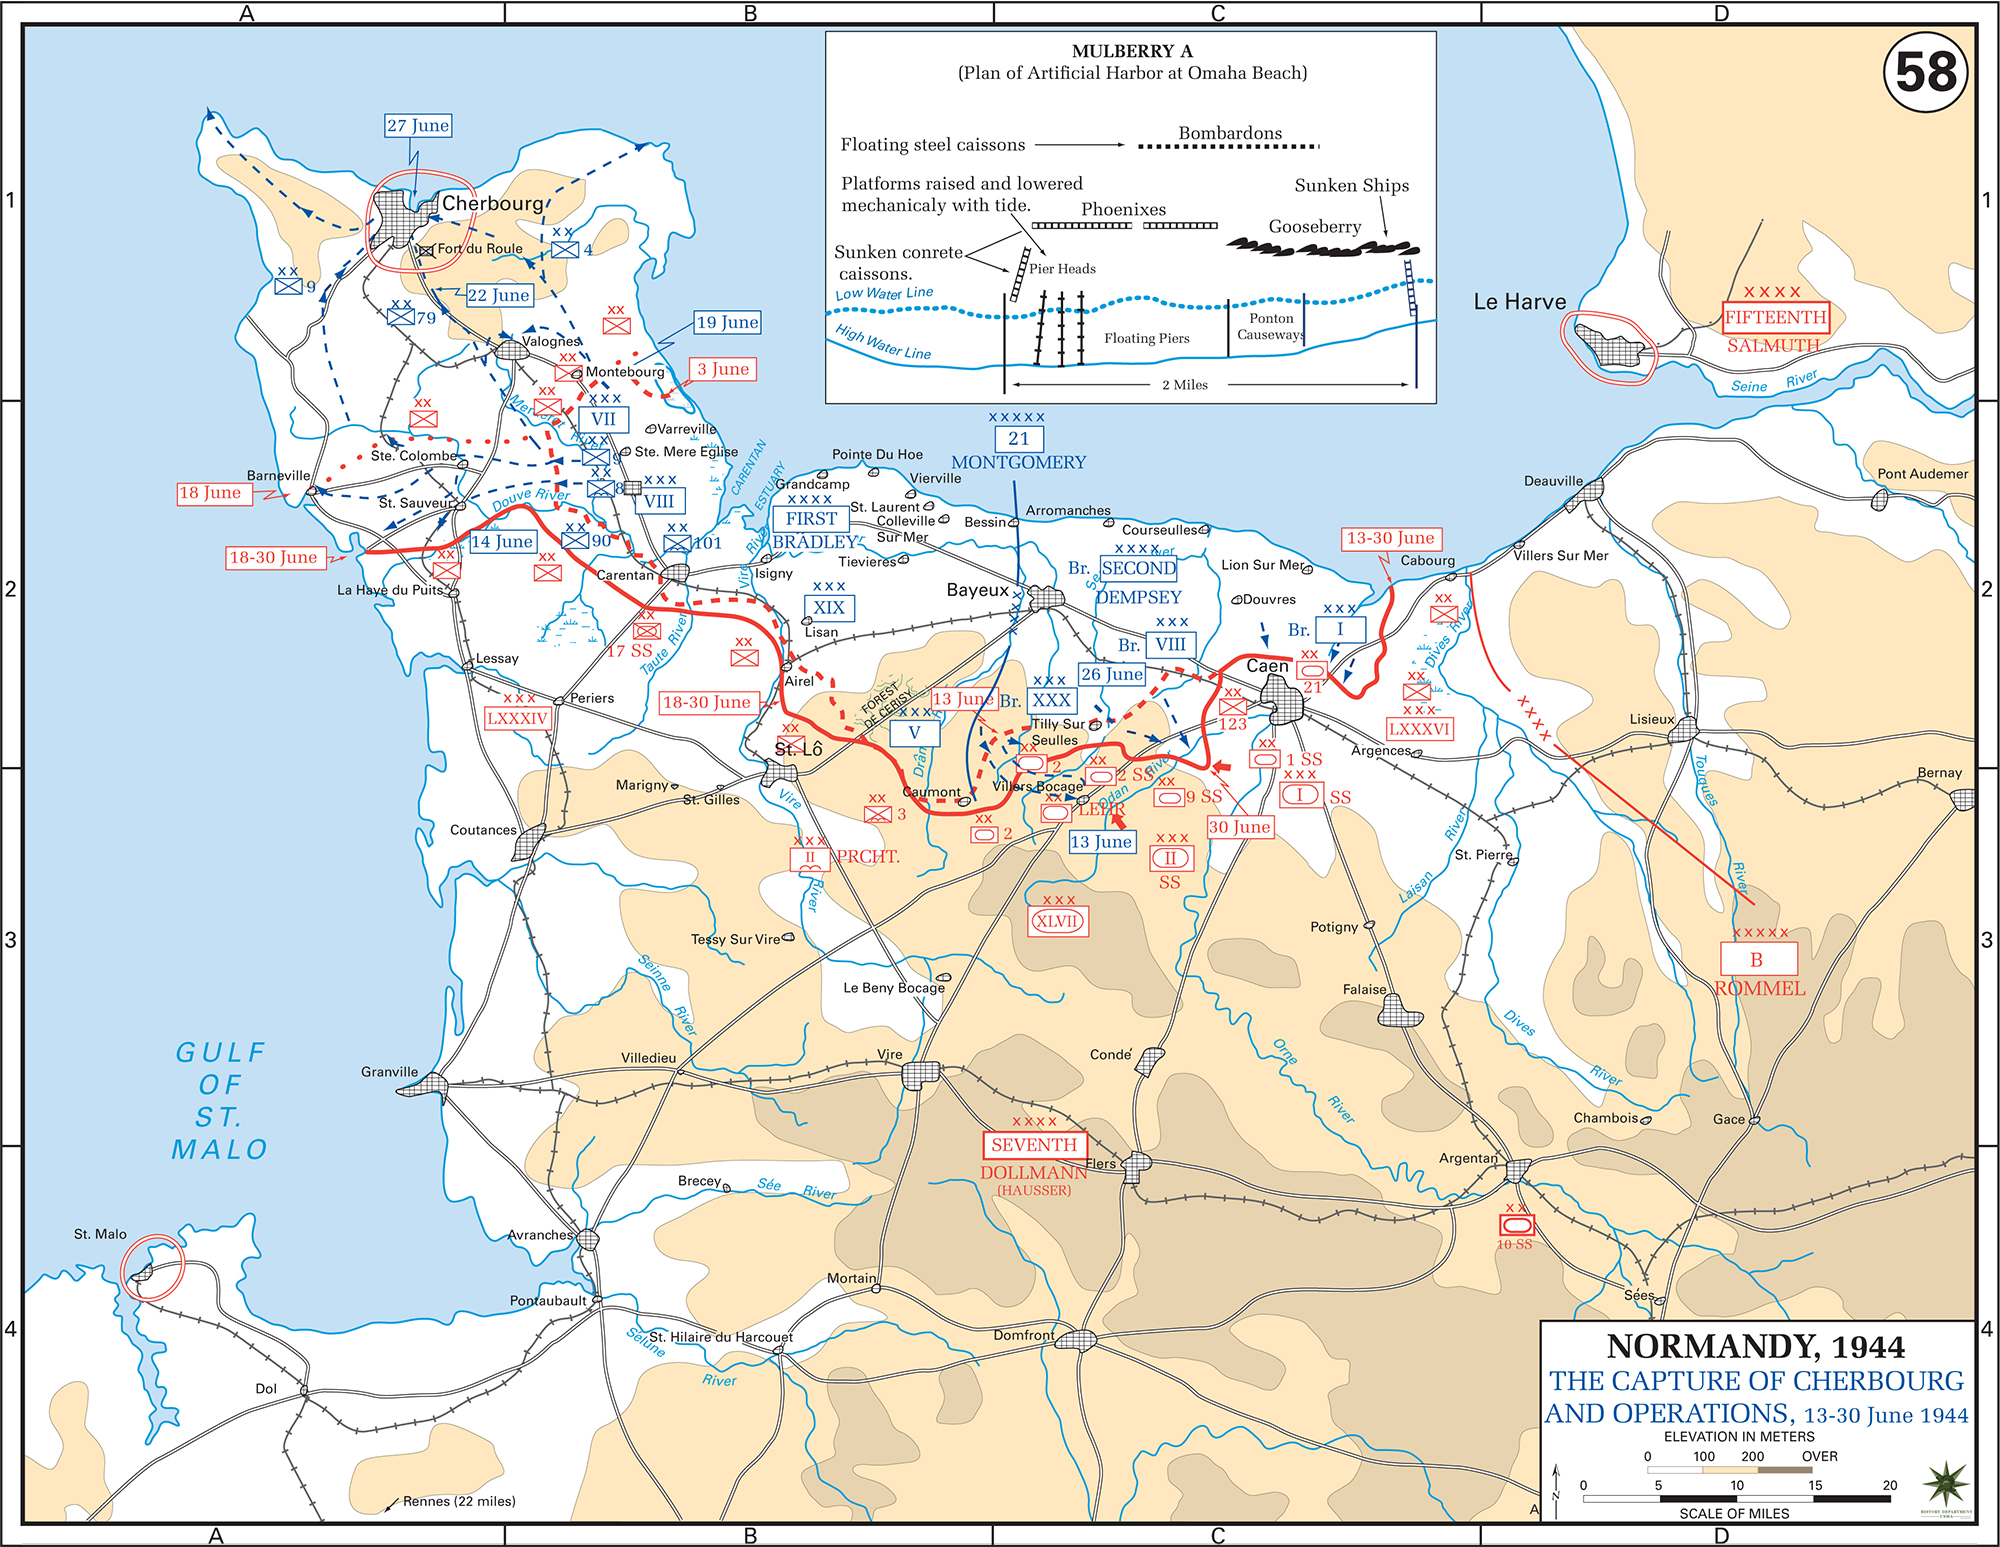 Map of WWII: Normandy. Operations June 13-30, 1944. Capture of Cherbourg.